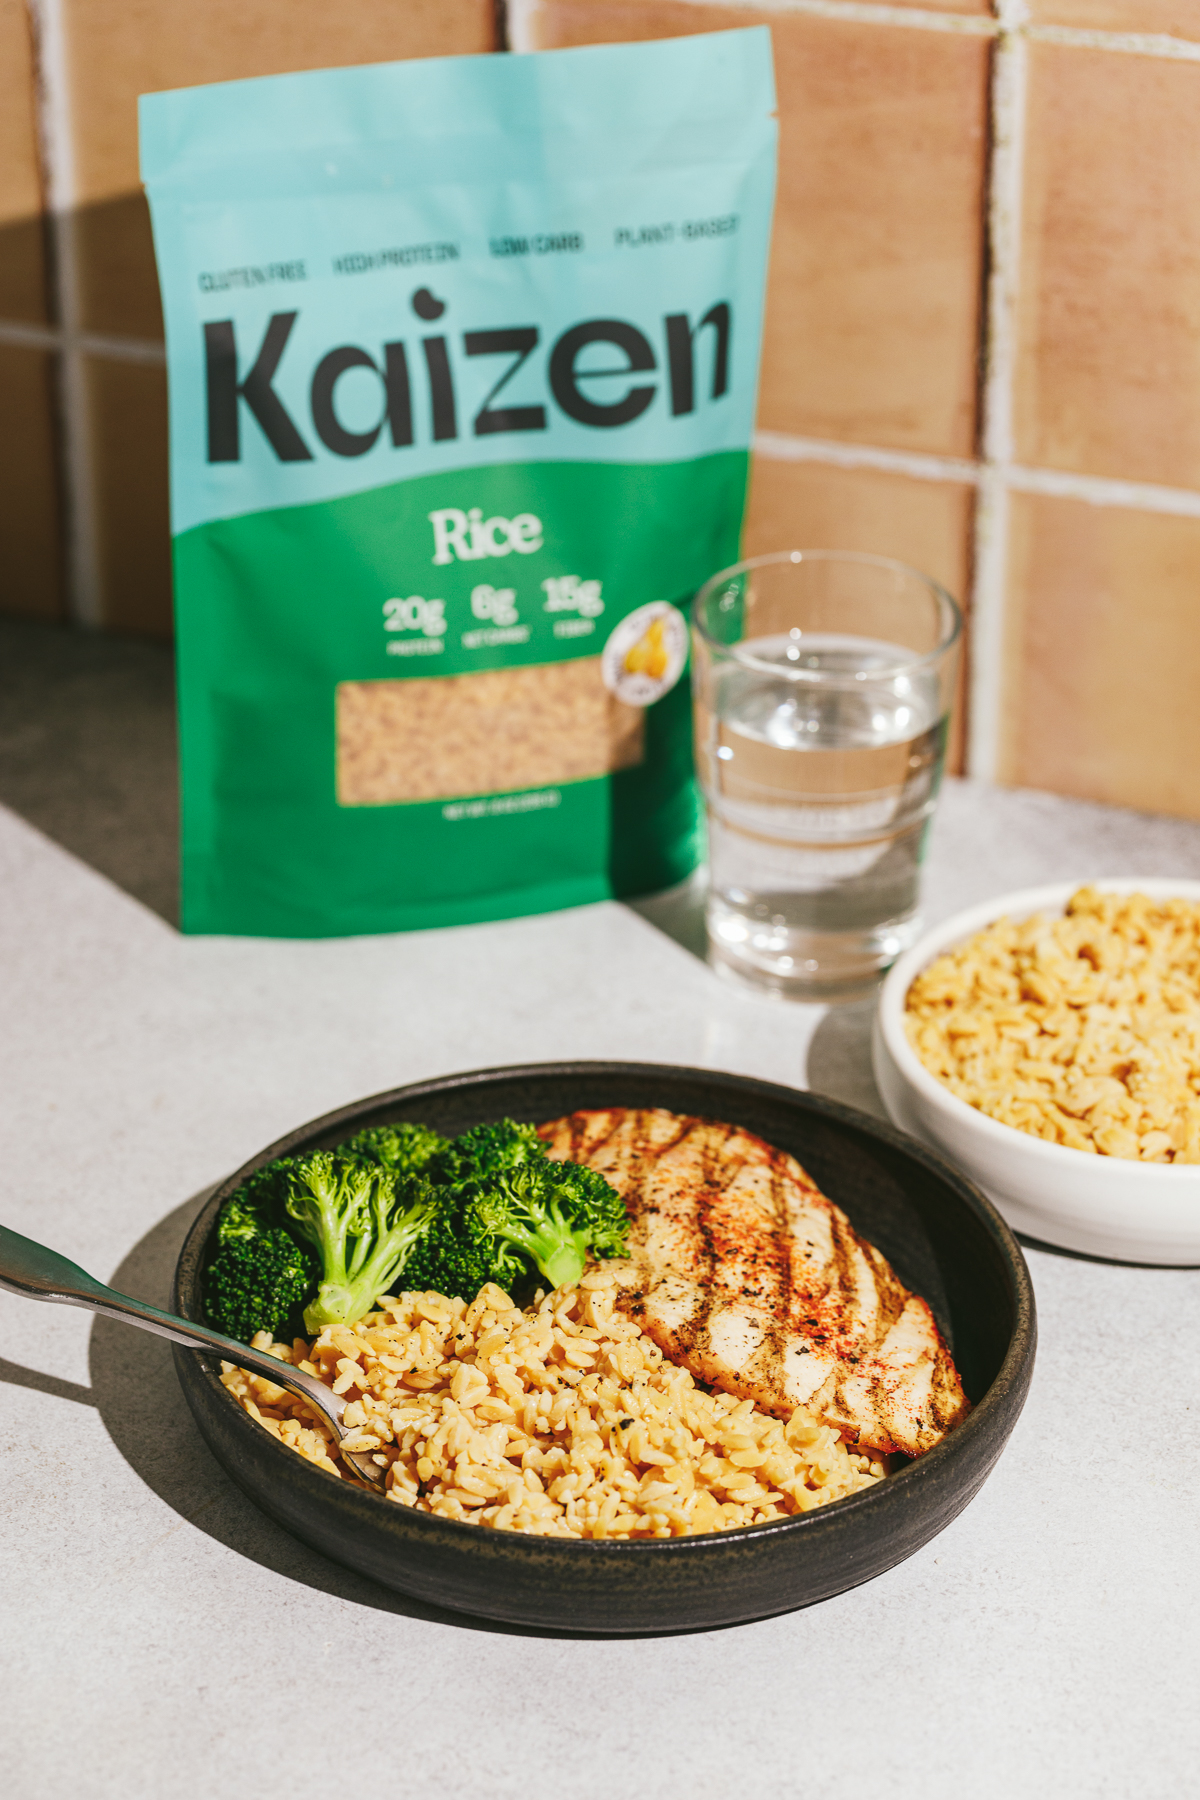 A bowl of kaizen rice with sides for low carb rice alternatives.